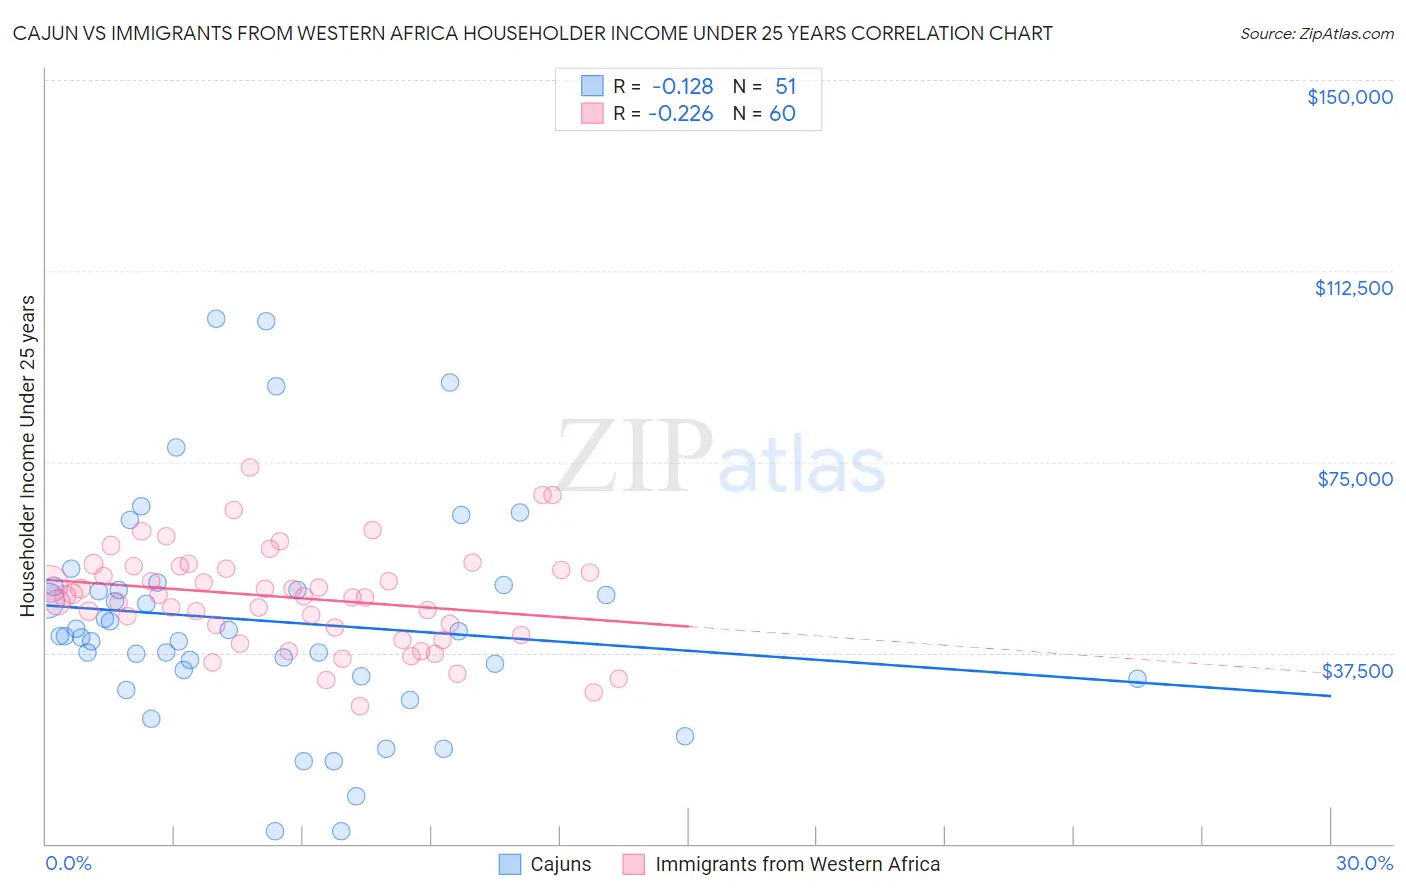 Cajun vs Immigrants from Western Africa Householder Income Under 25 years